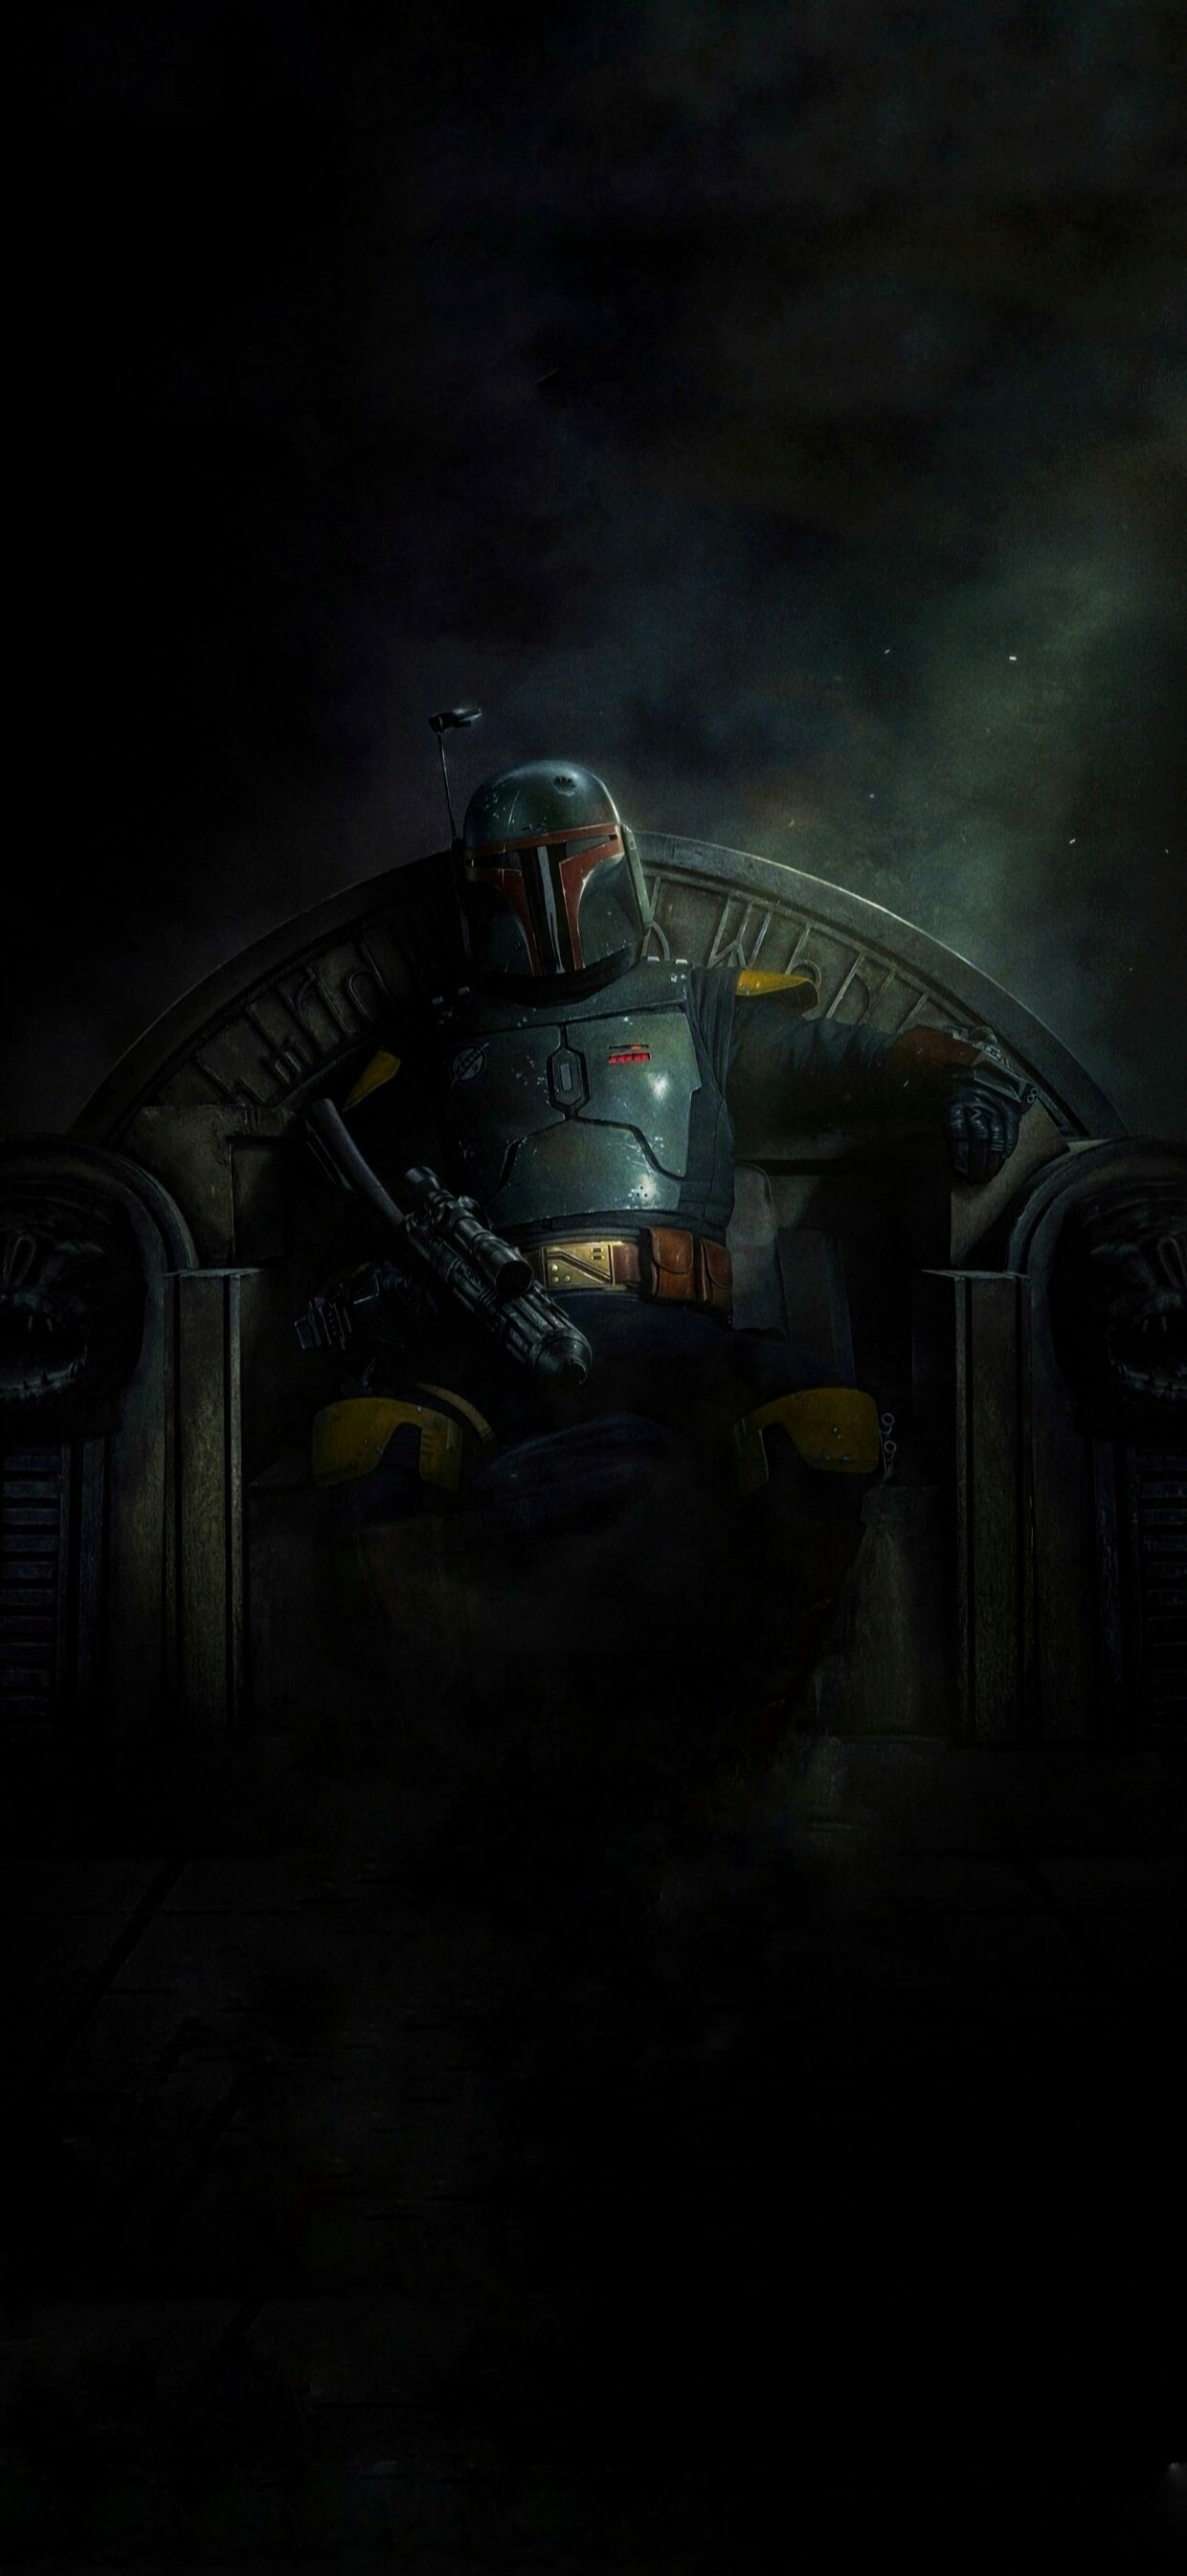 The Book of Boba Fett: A spin-off of the acclaimed Star Wars show The Mandalorian. 1240x2700 HD Wallpaper.